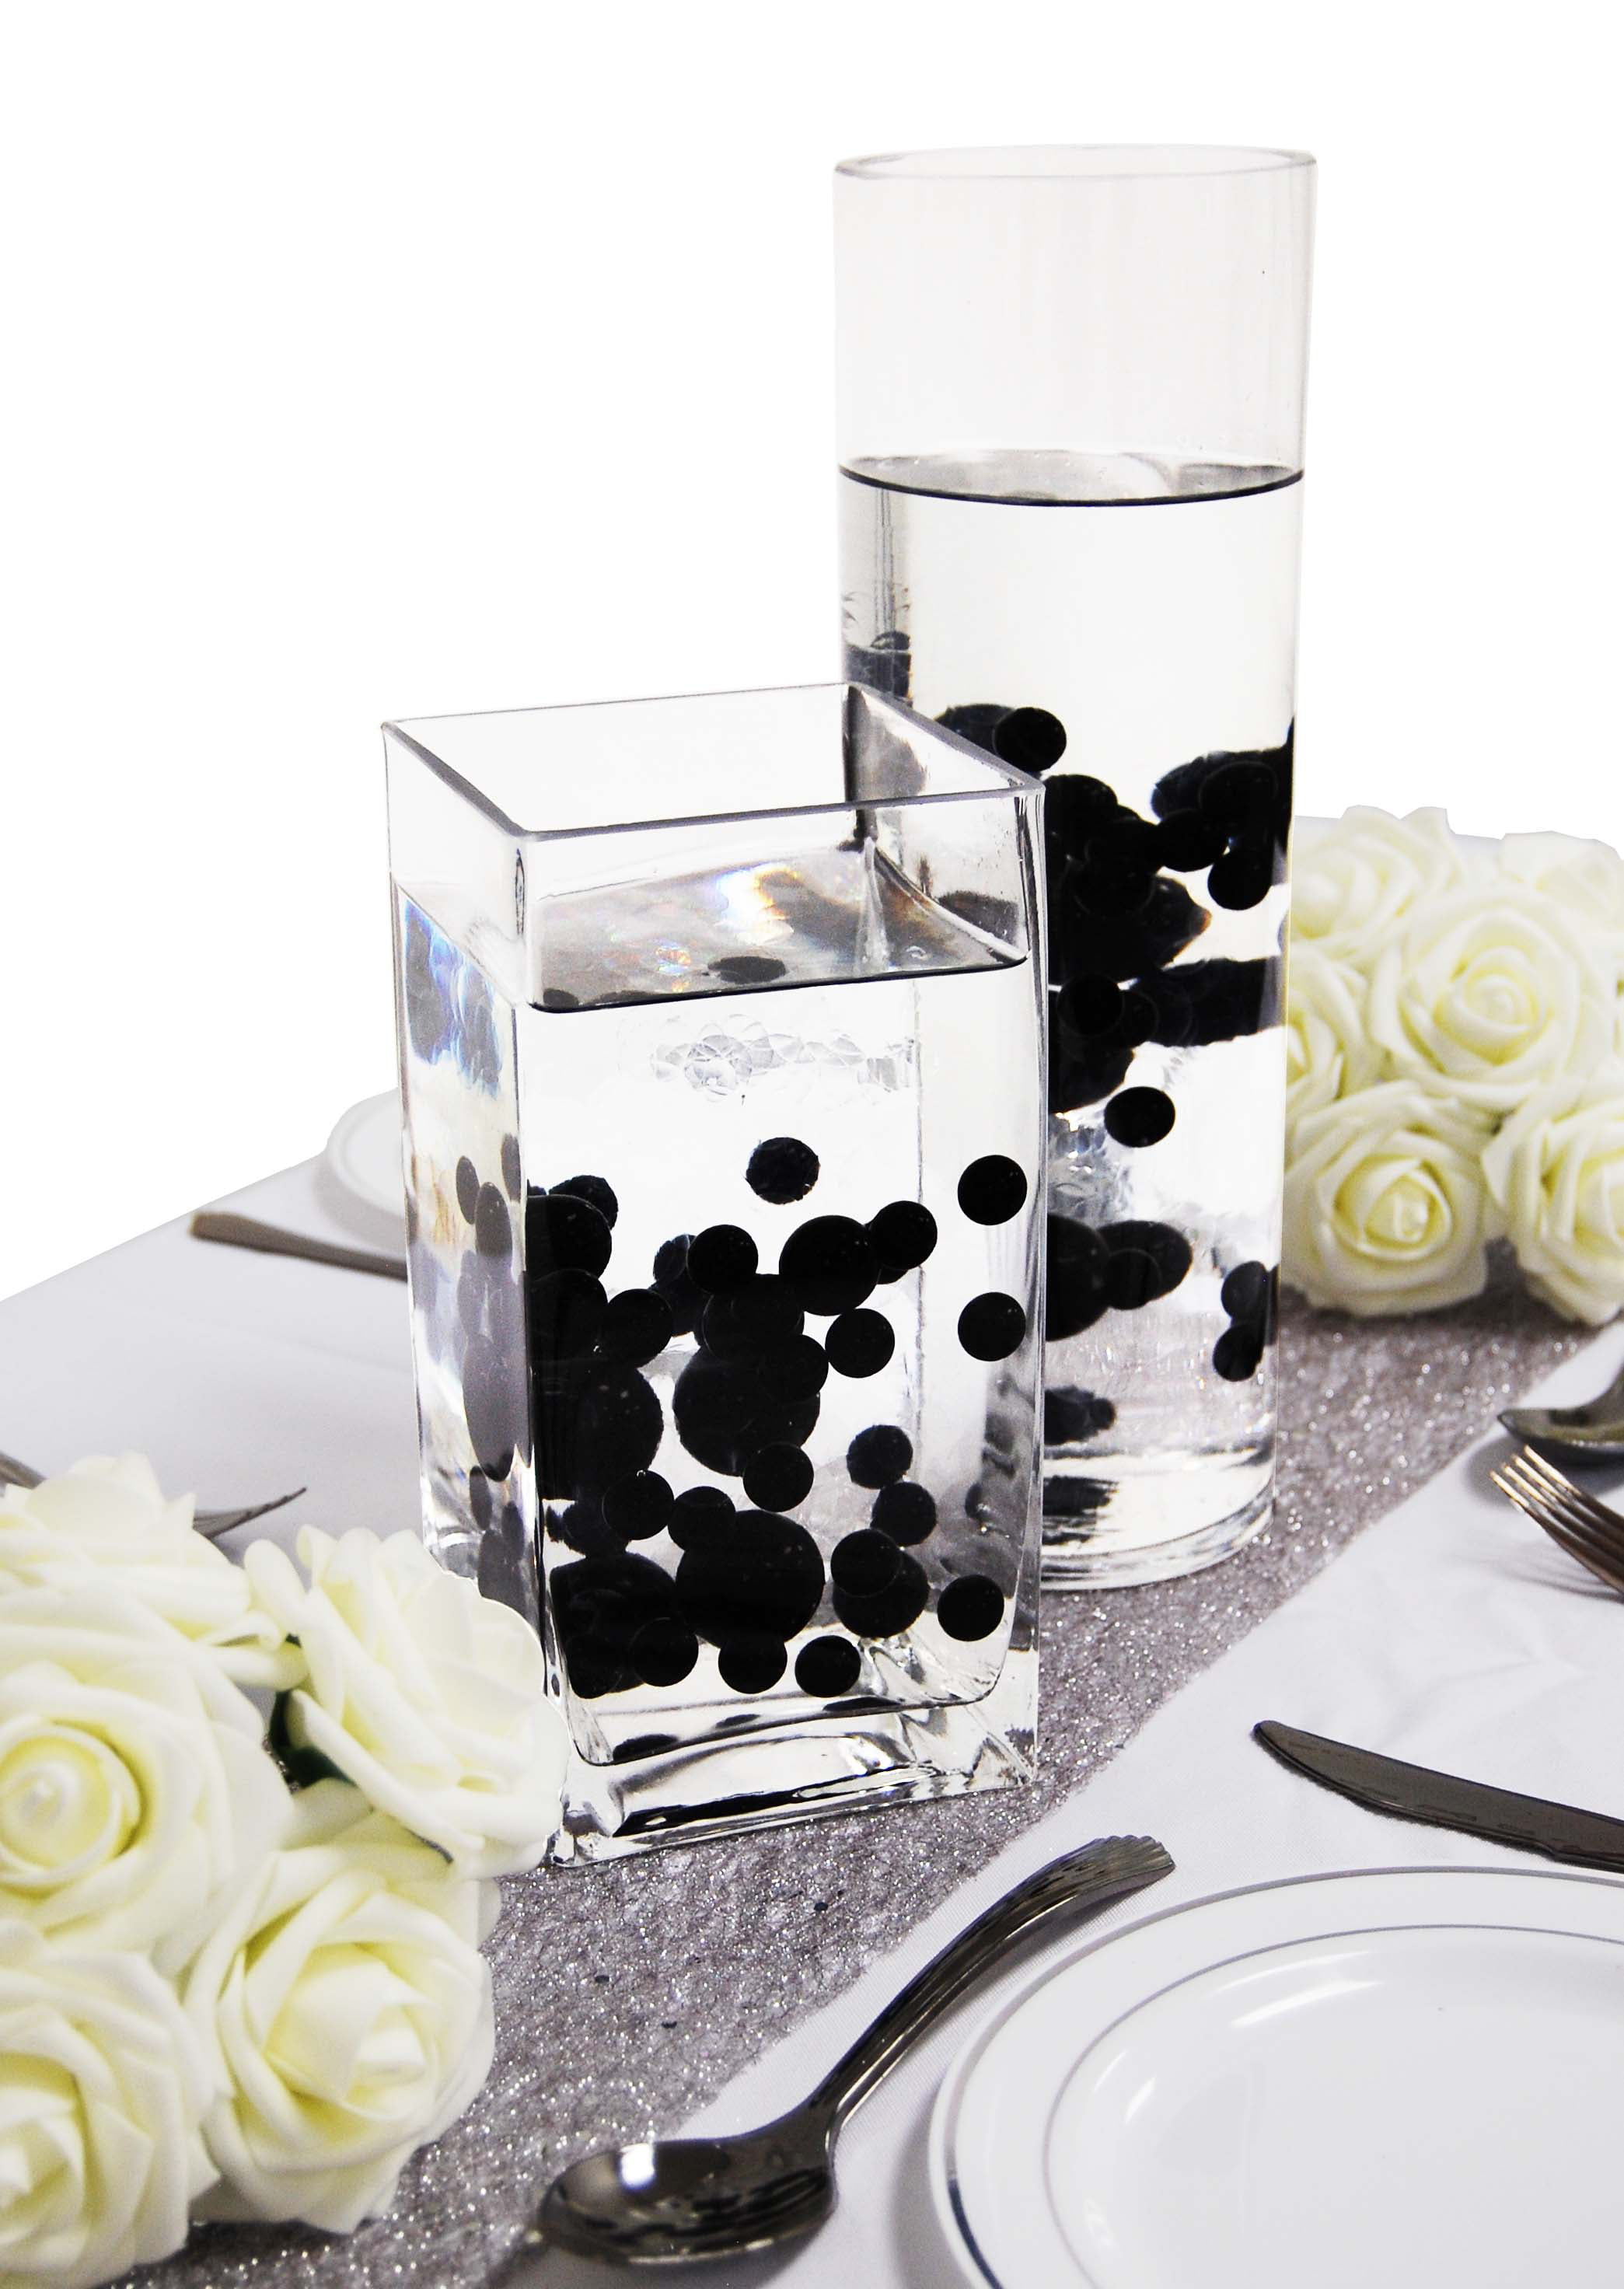  Floating Black Pearls-Shiny-Jumbo Sizes-Fills 1 Gallon of Gels  for The Floating Effect-with Exclusive Meaured Prep Kit-No Guessing-Perfect  Results! Vase Decorations : Home & Kitchen